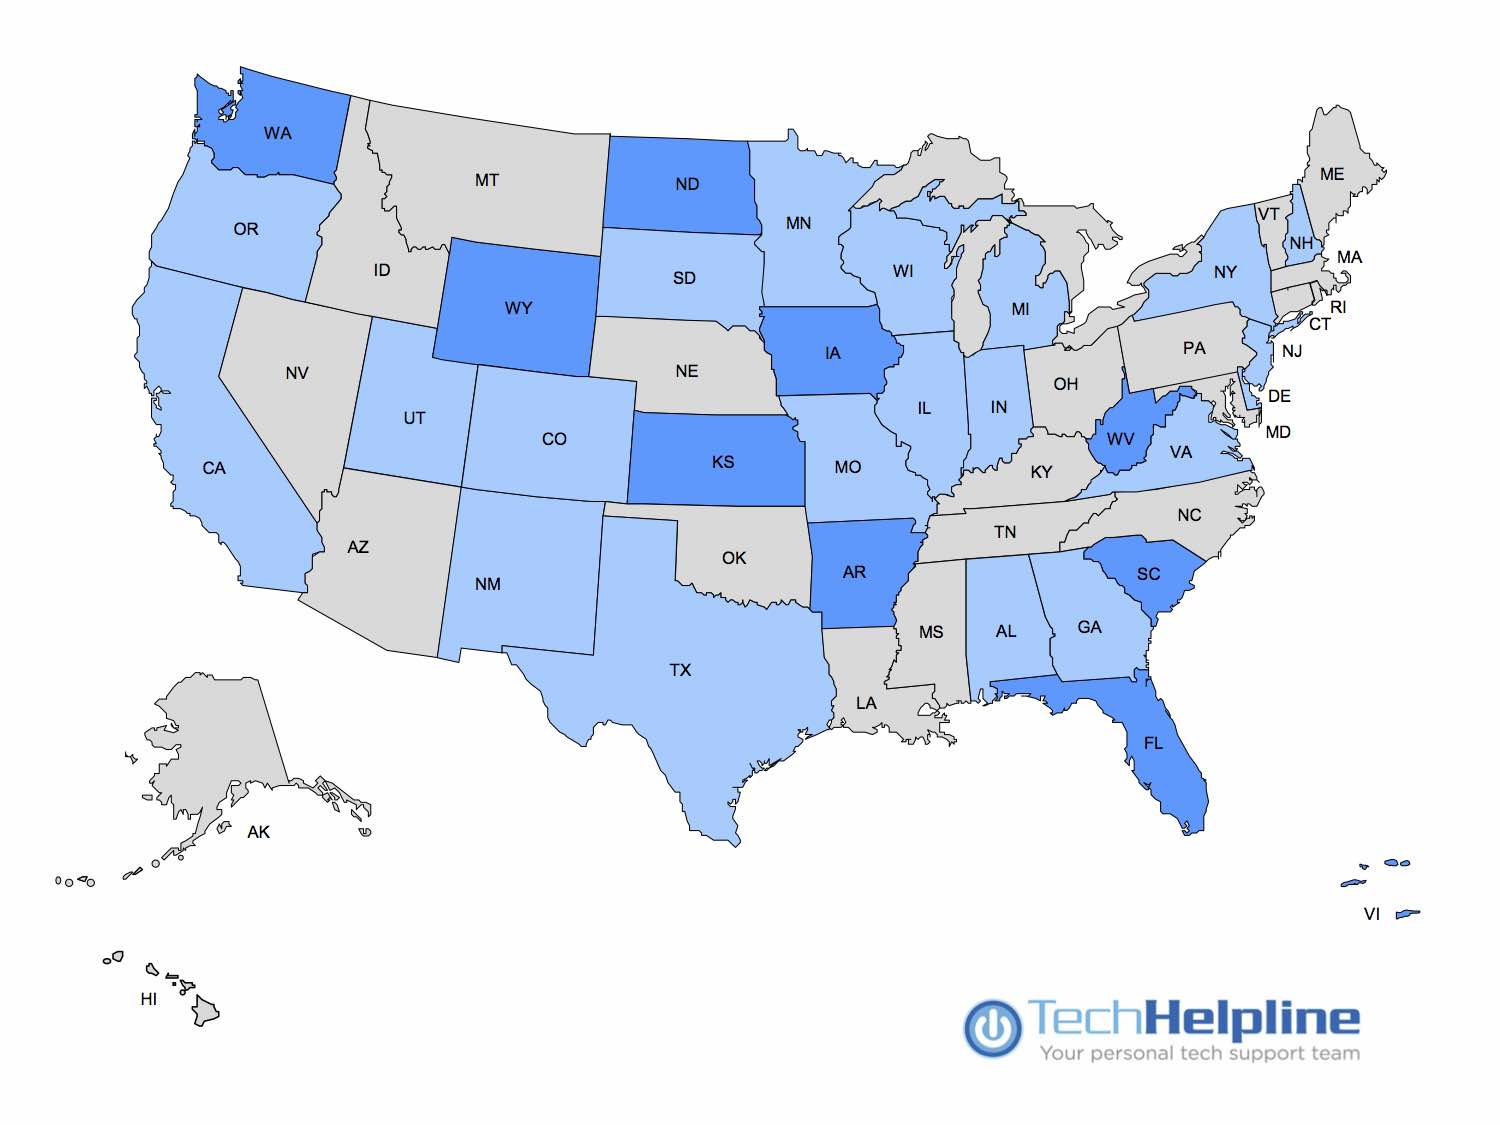 techhelp us coverage map